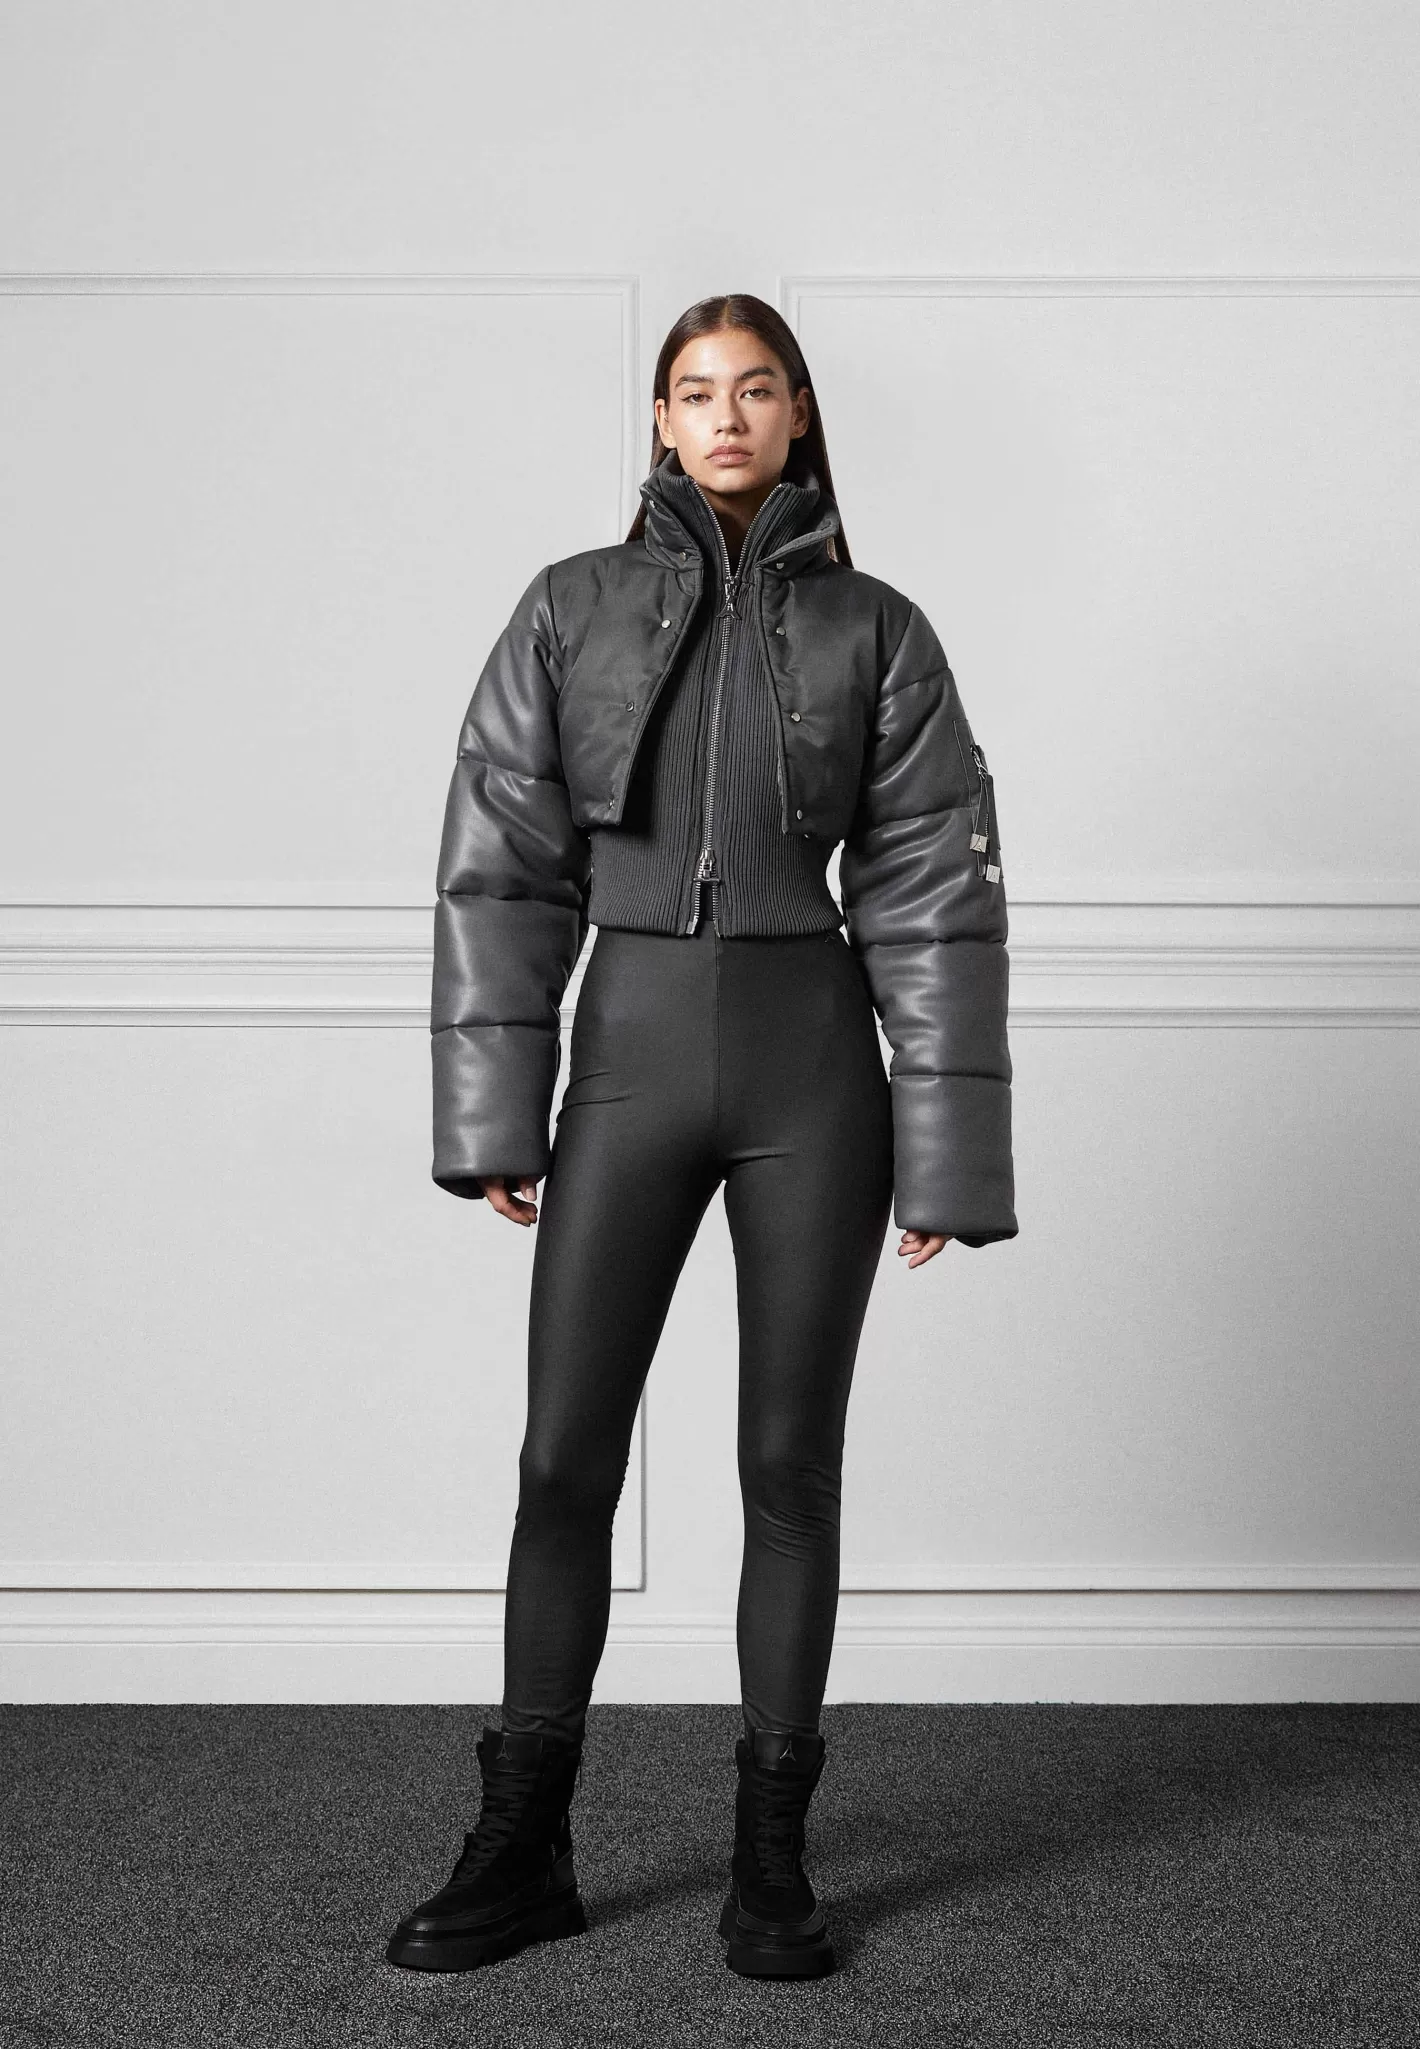 Vegan Leather and Nylon Layered Puffer Jacket - -Manière De Voir Clearance